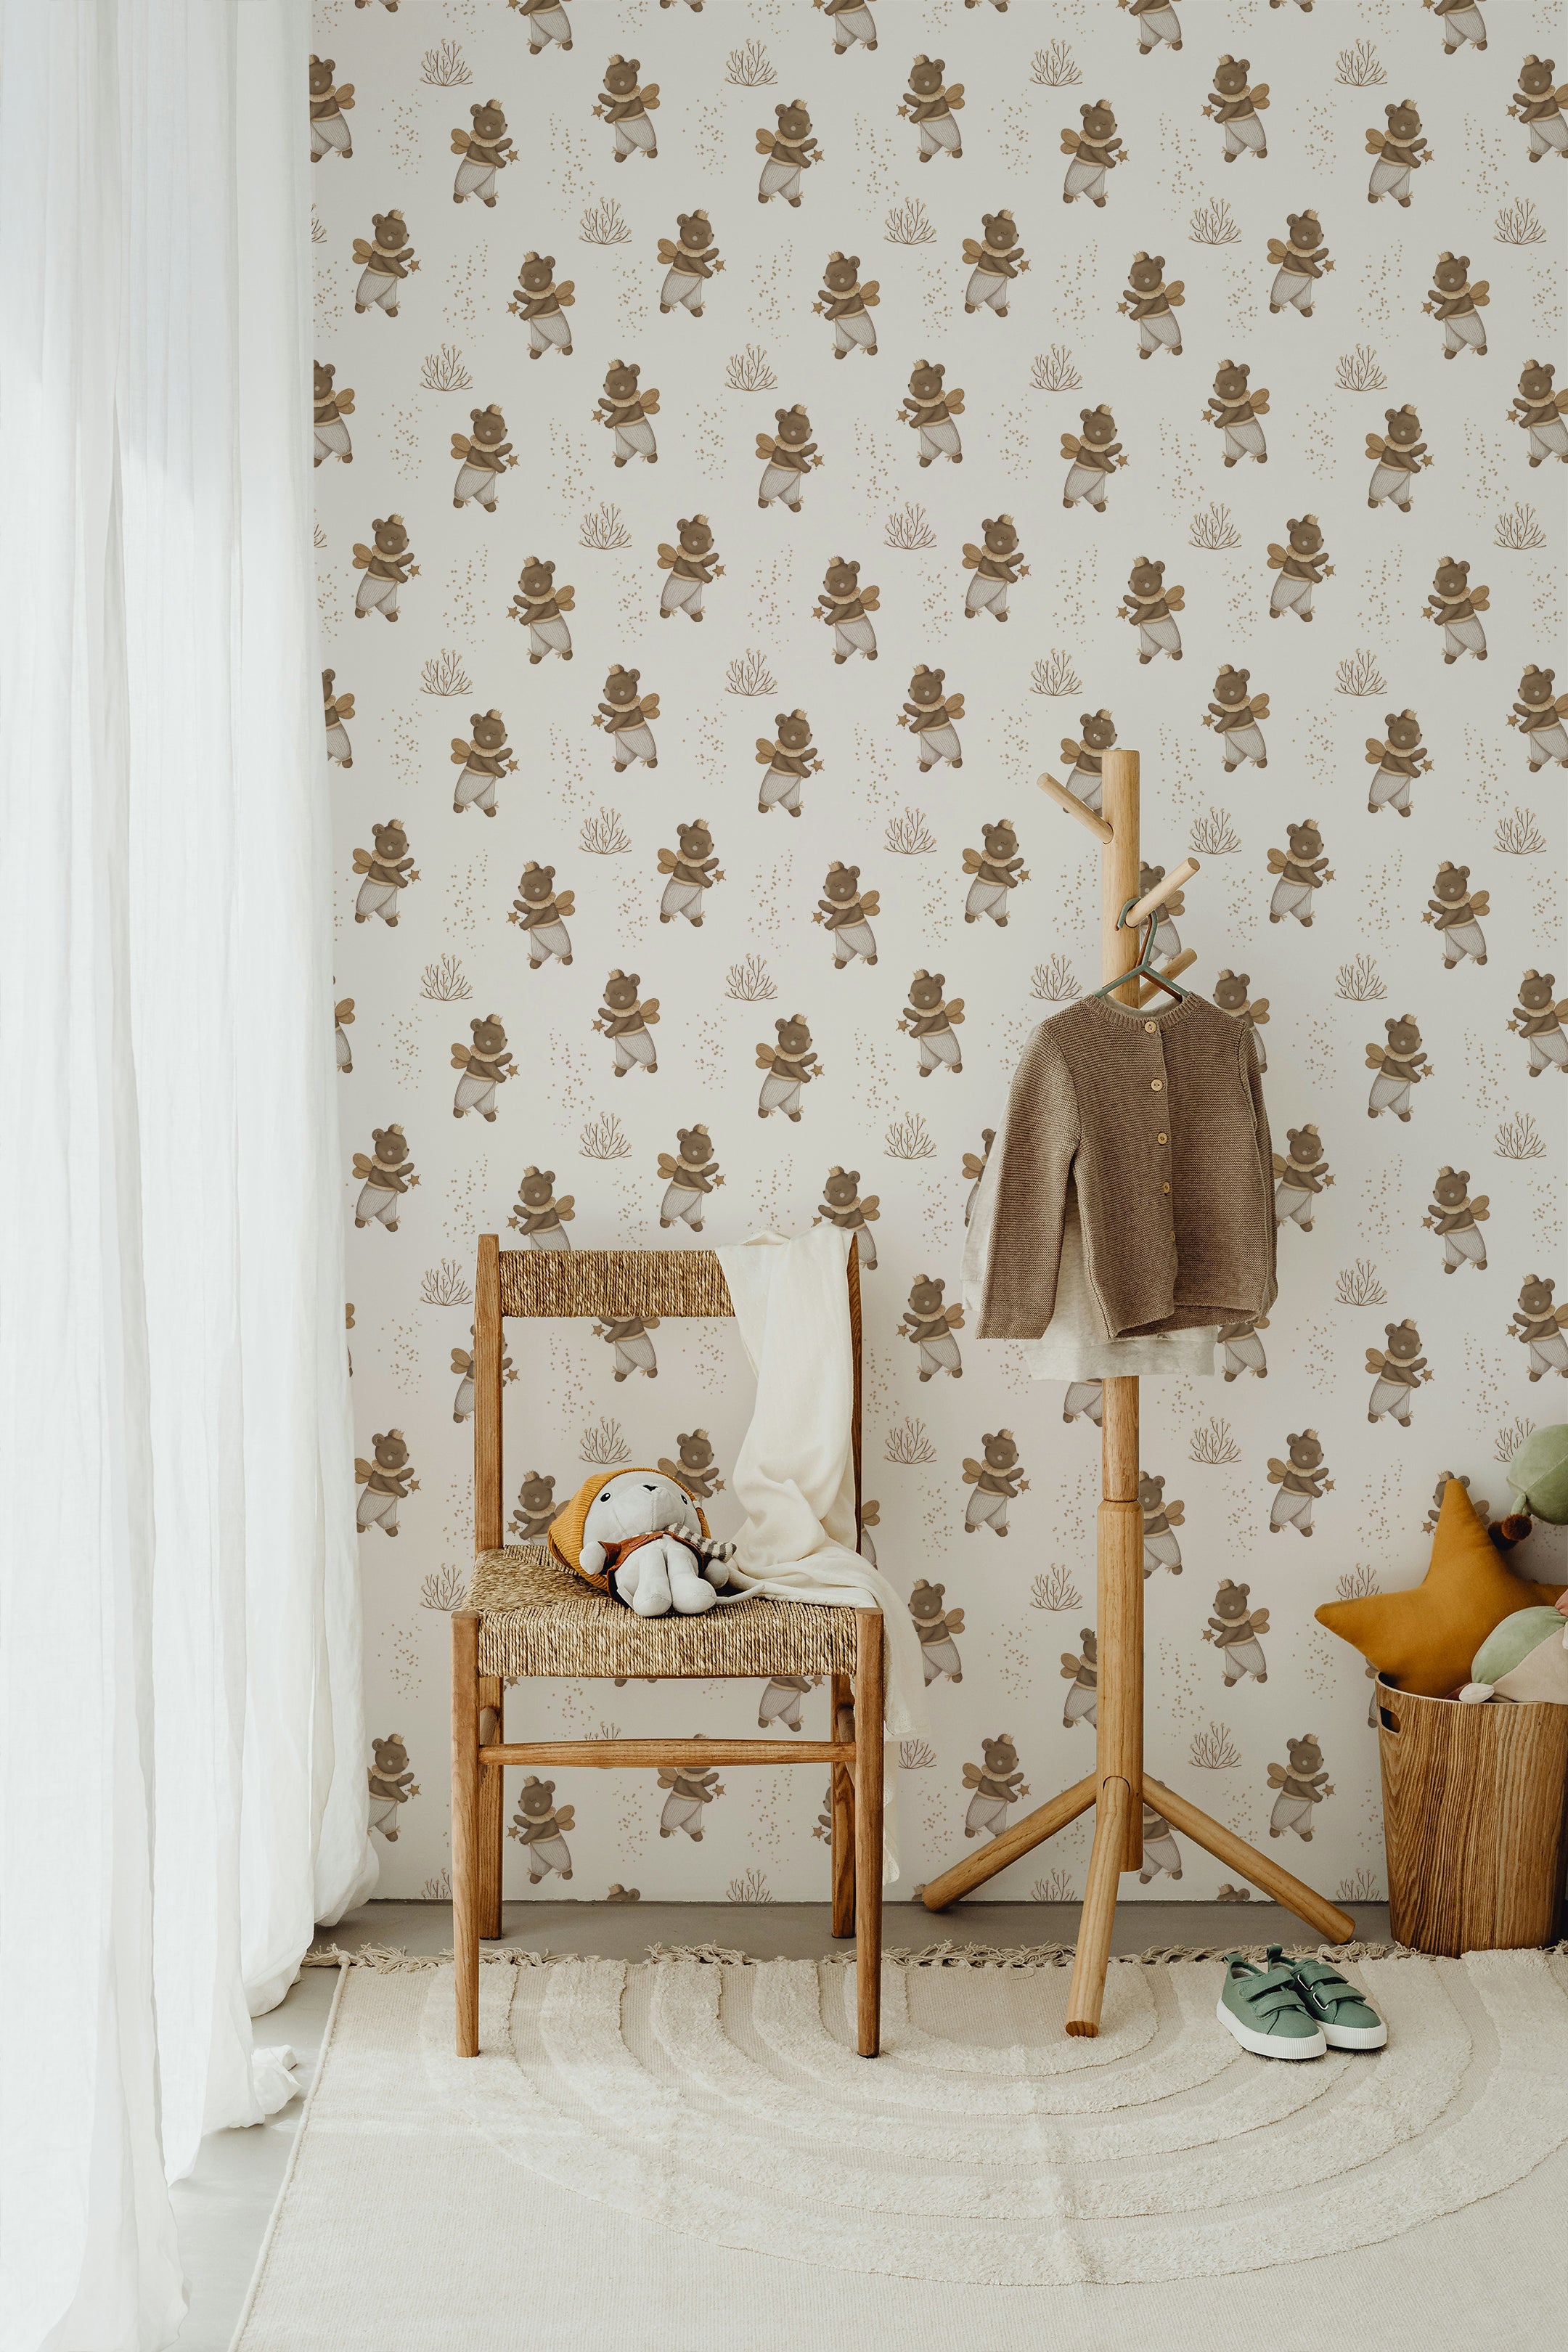 A charming corner of a nursery with Stardust Bears Wallpaper, a wooden chair, and a coat rack. Soft toys and cozy decor complete the inviting space.